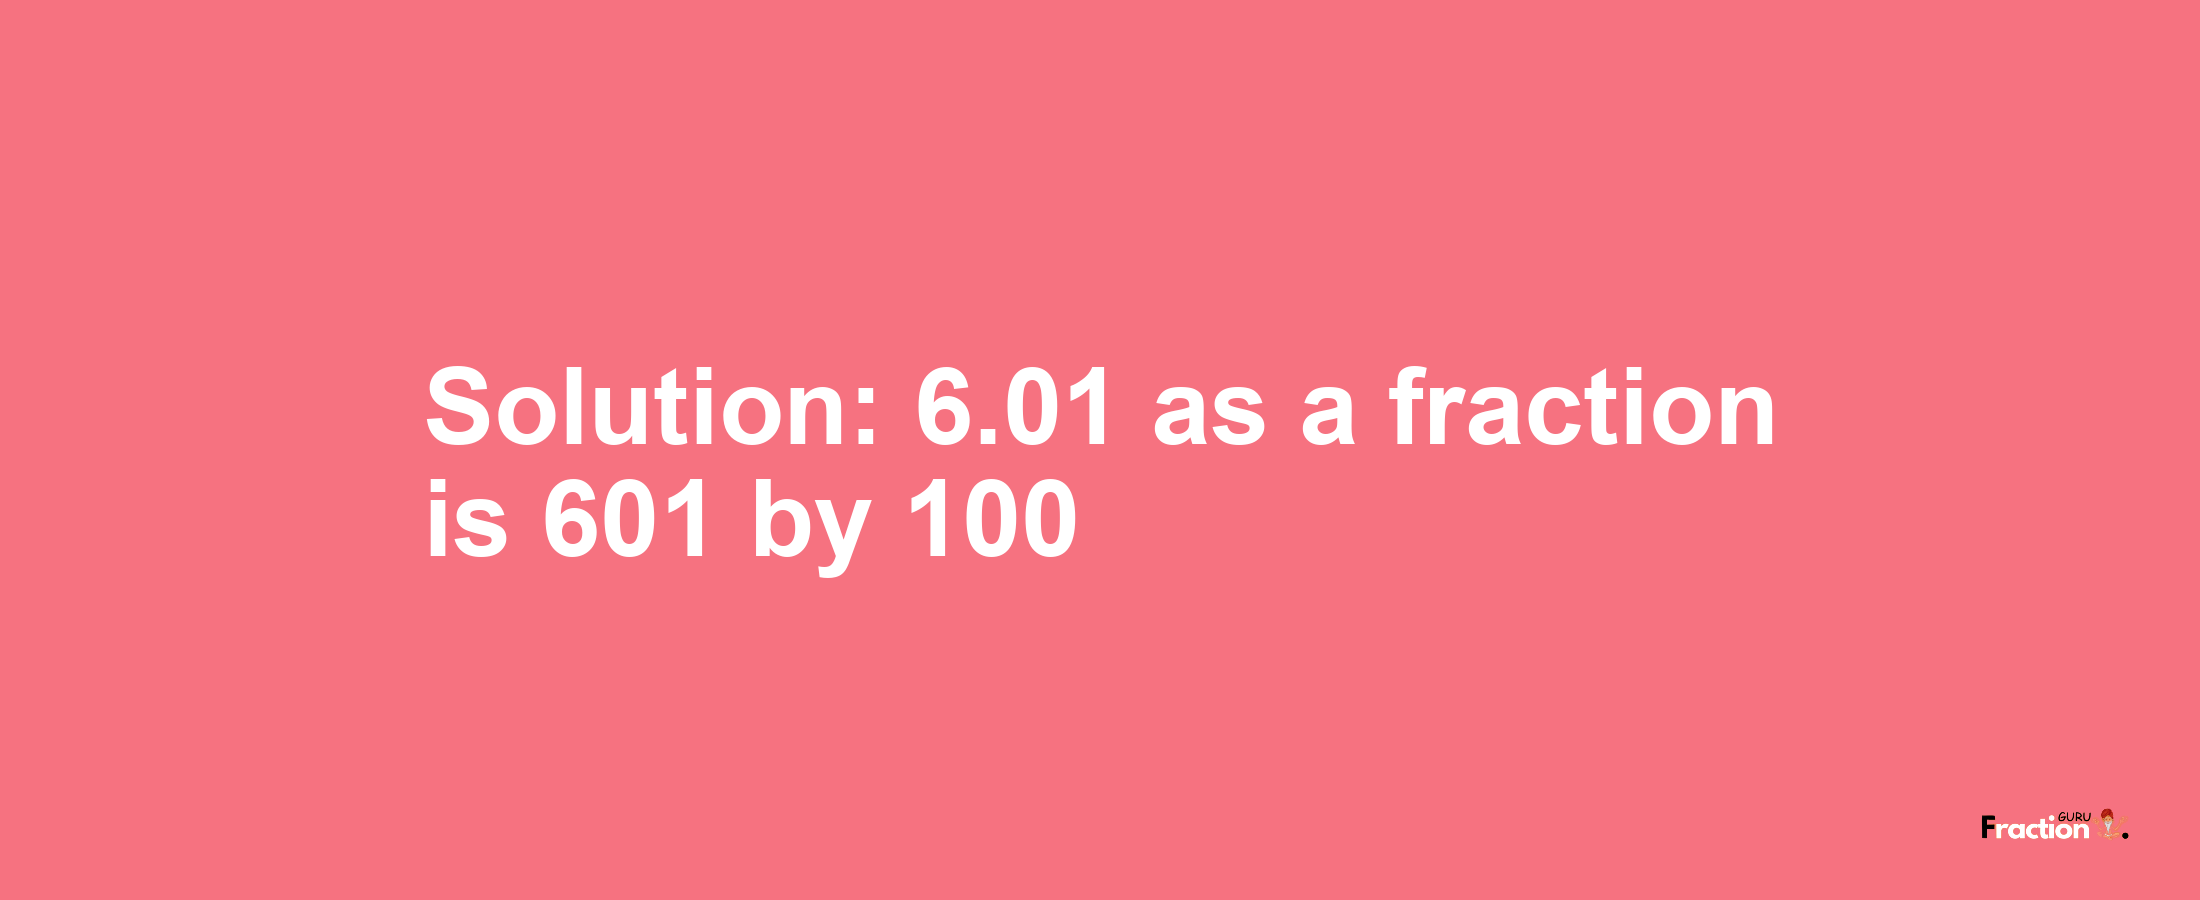 Solution:6.01 as a fraction is 601/100